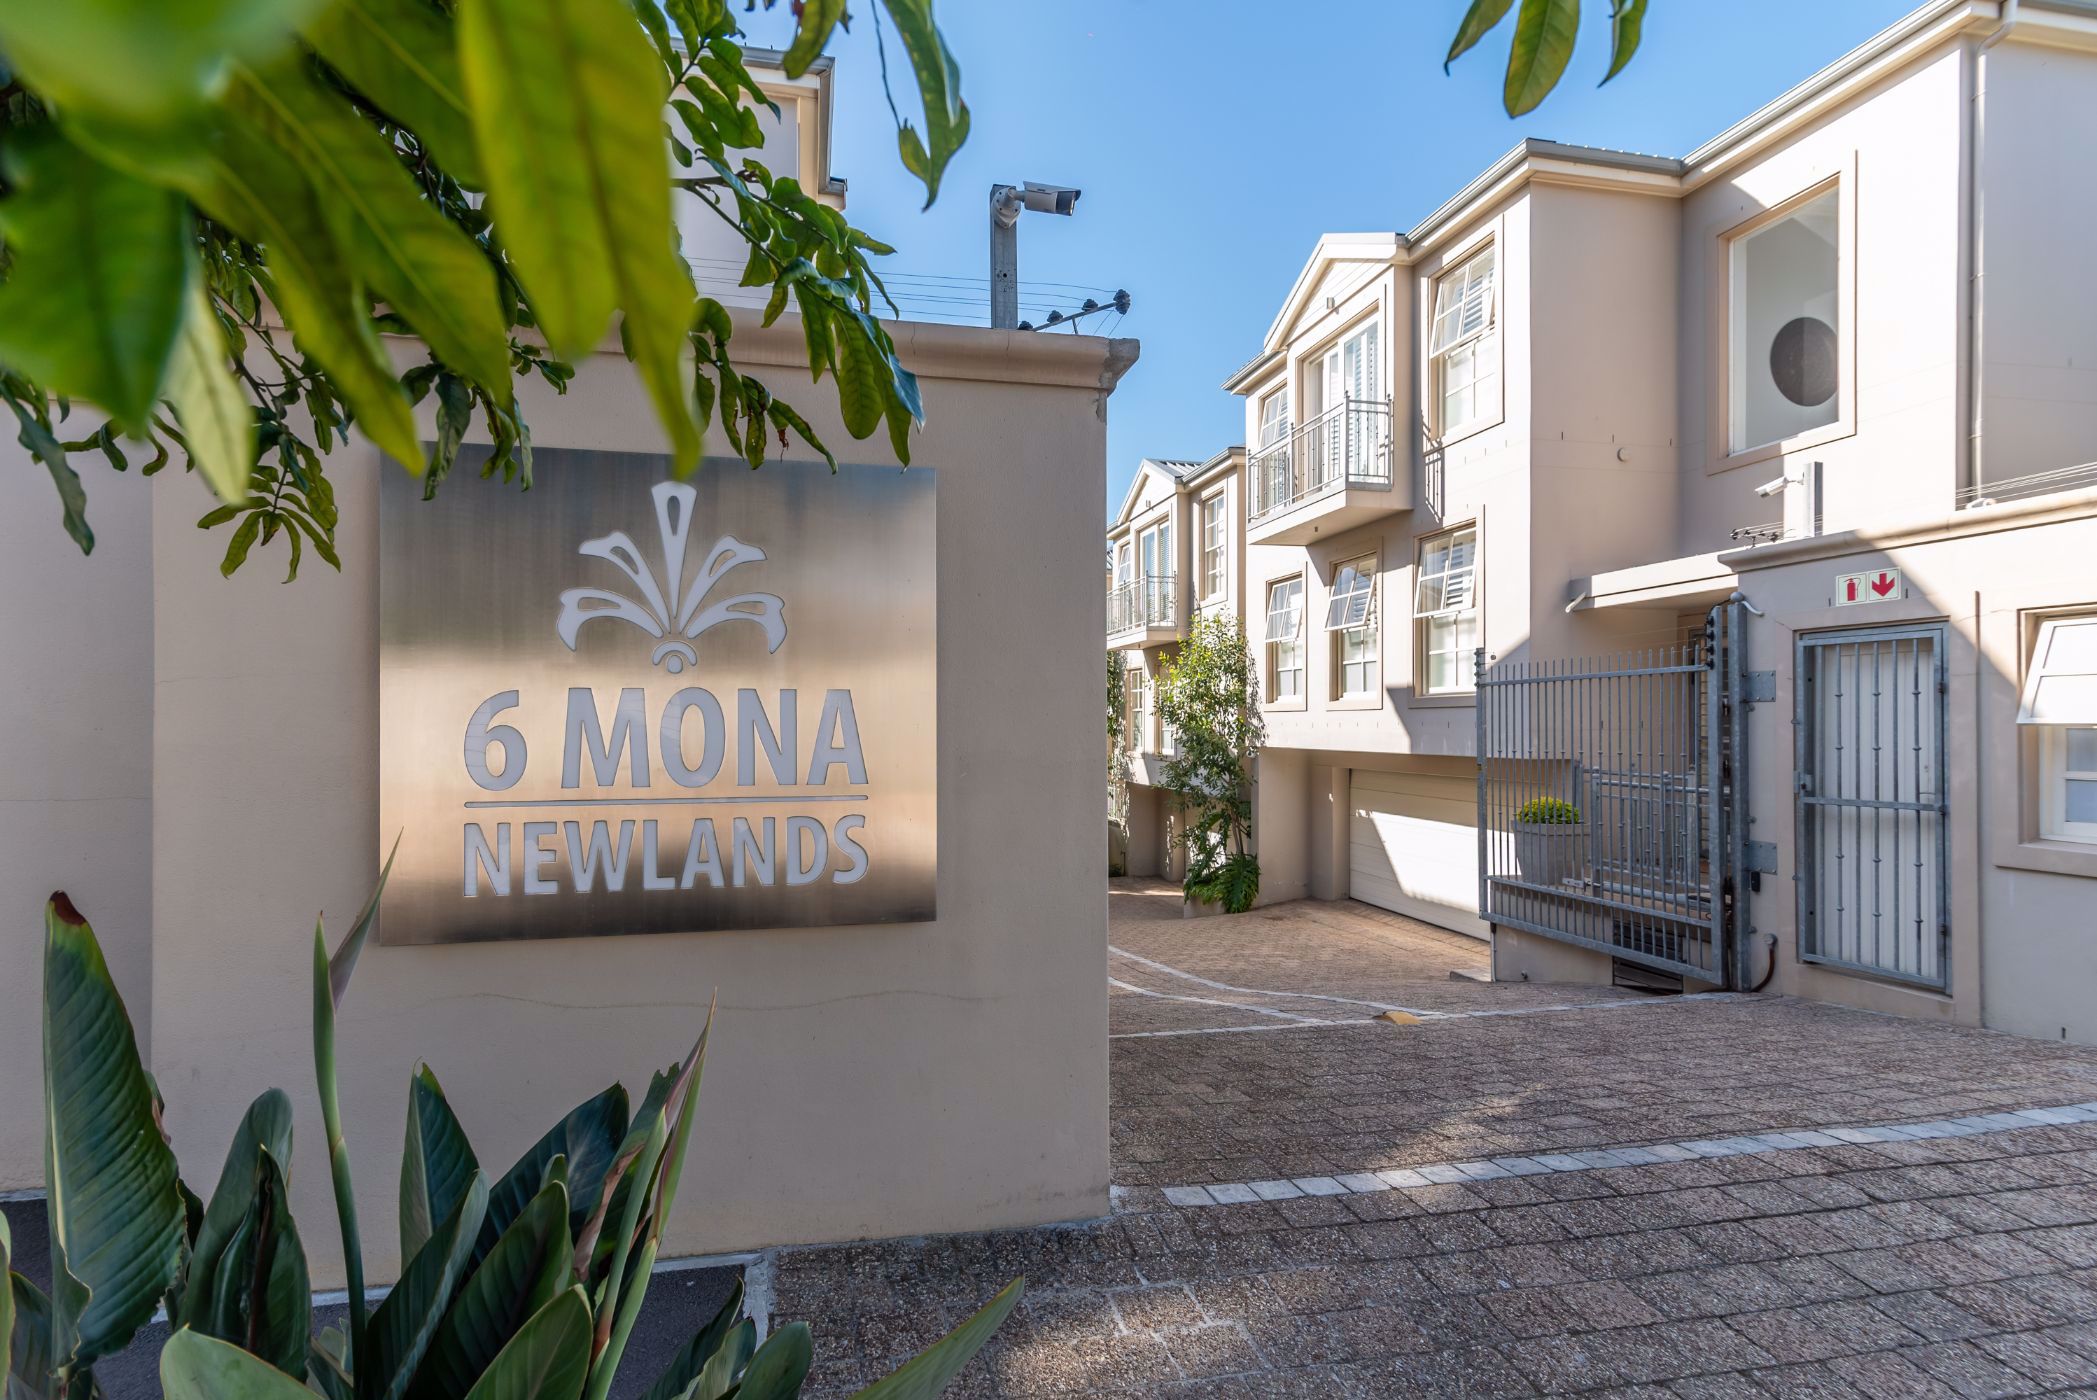 3 bedroom house for sale in Newlands (Cape Town)